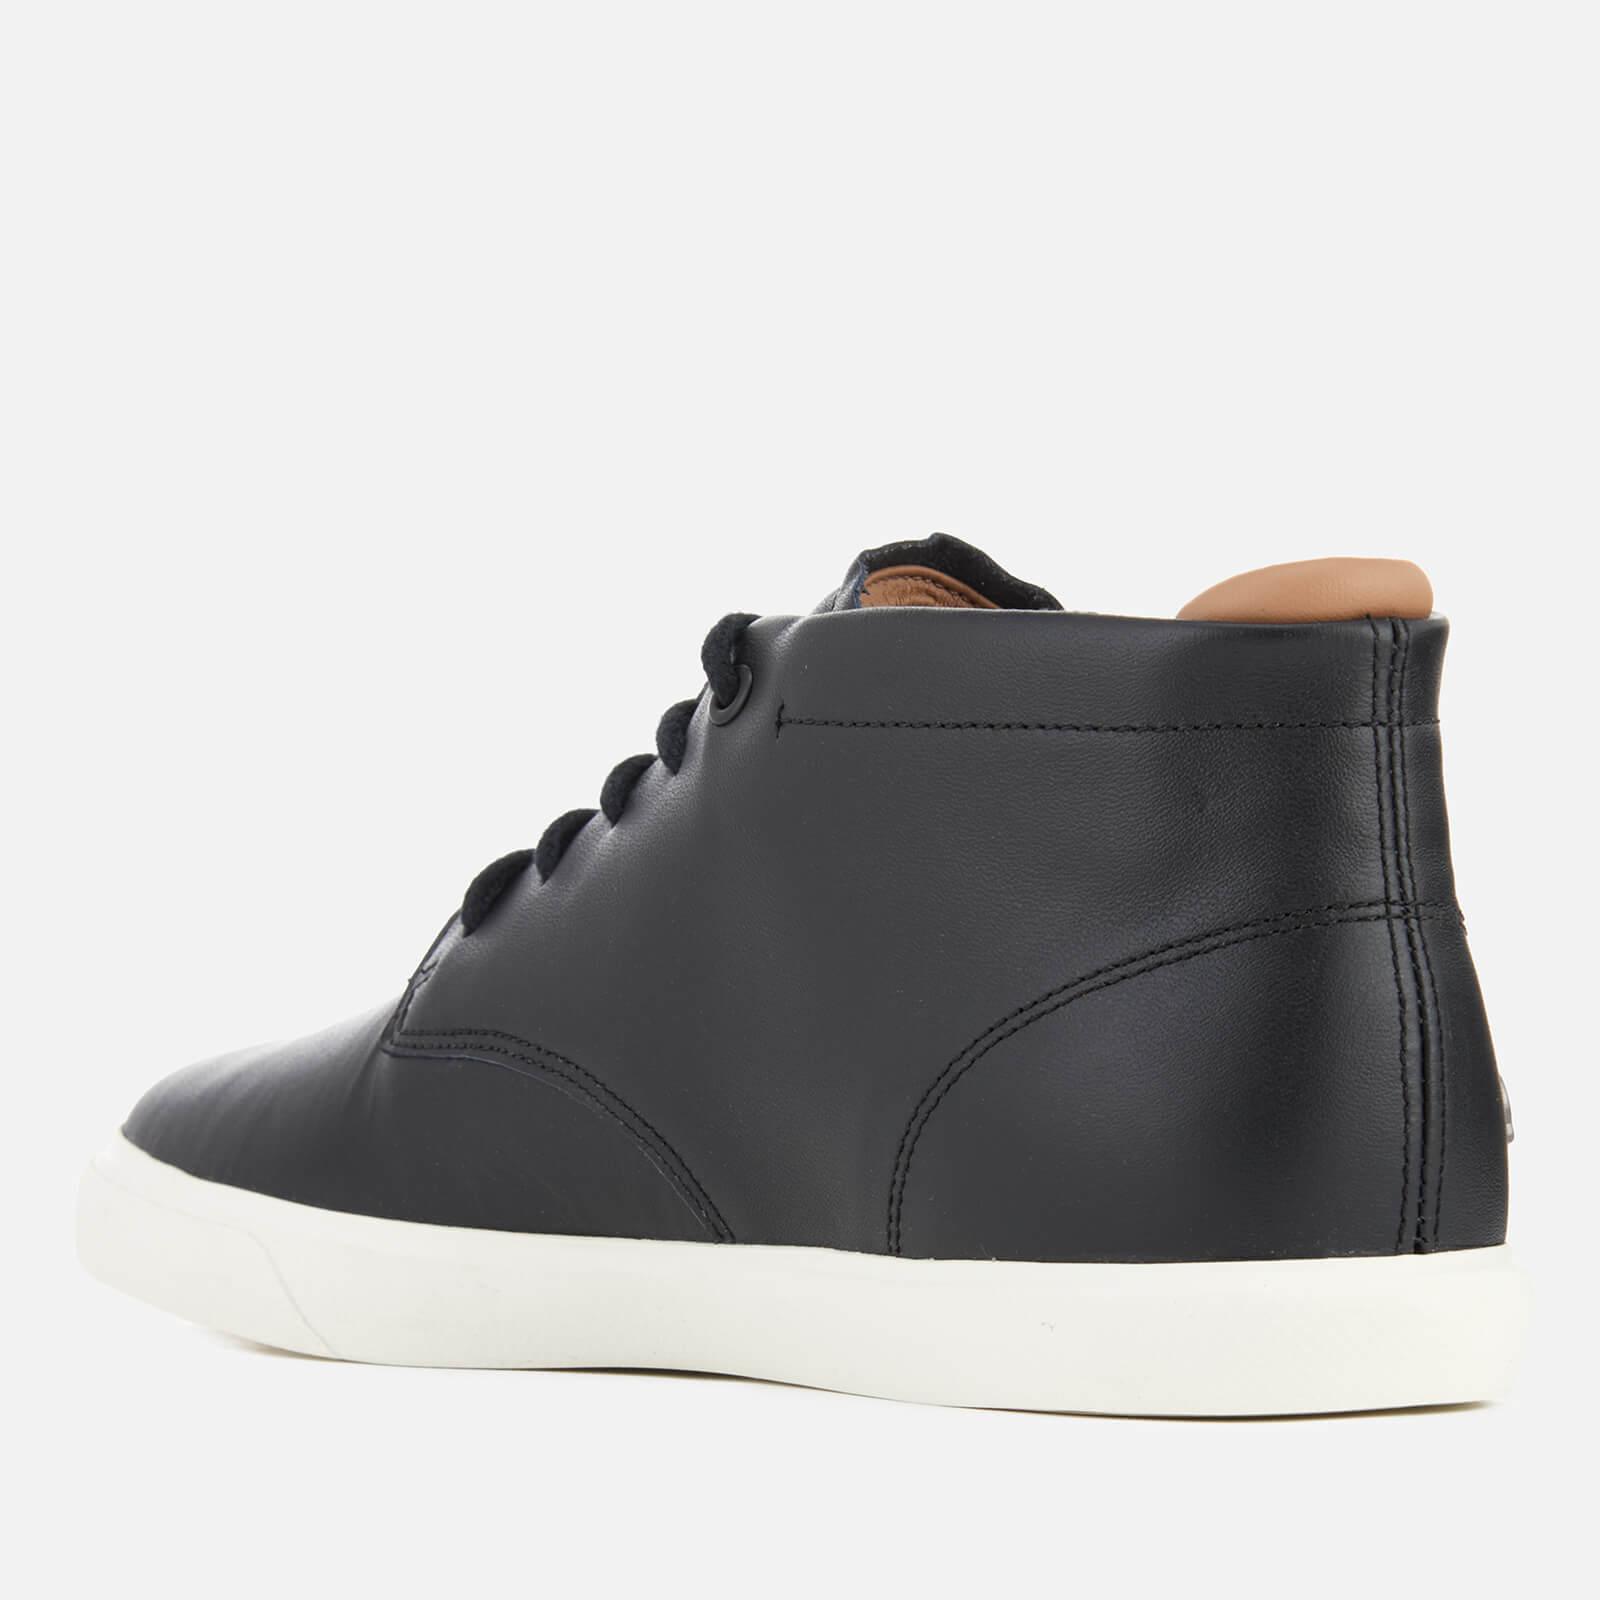 Lacoste Leather Men's Espere Chukka 317 1 Boots in Black for Men - Lyst